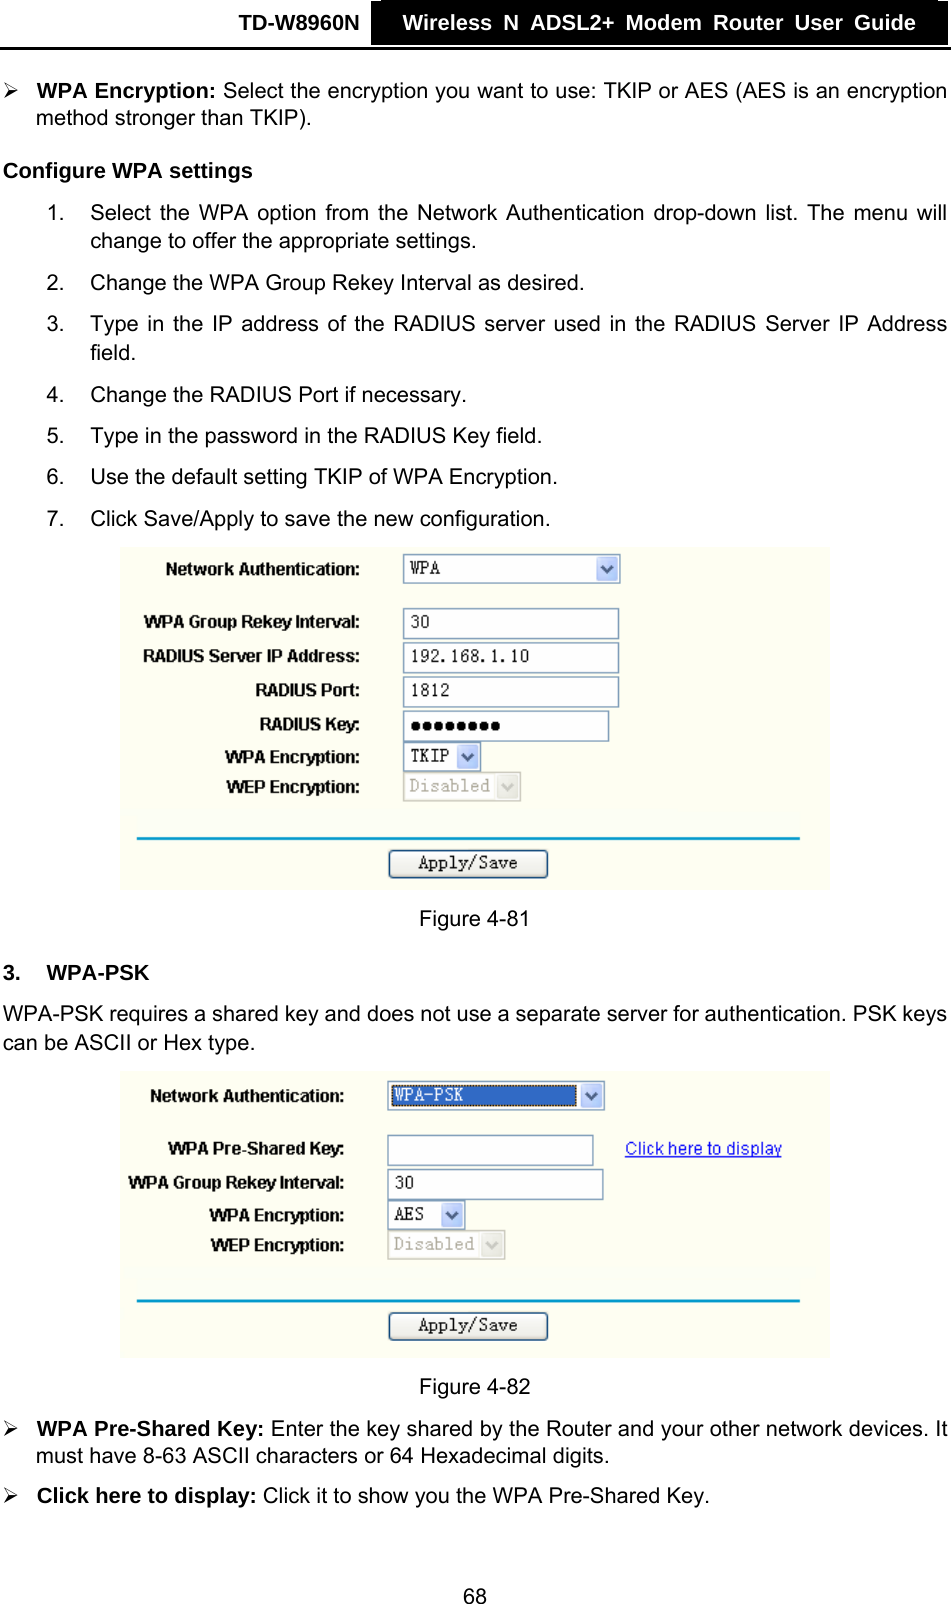 TD-W8960N    Wireless N ADSL2+ Modem Router User Guide    ¾ WPA Encryption: Select the encryption you want to use: TKIP or AES (AES is an encryption method stronger than TKIP). Configure WPA settings 1.  Select the WPA option from the Network Authentication drop-down list. The menu will change to offer the appropriate settings. 2.  Change the WPA Group Rekey Interval as desired. 3.  Type in the IP address of the RADIUS server used in the RADIUS Server IP Address field. 4.  Change the RADIUS Port if necessary. 5.  Type in the password in the RADIUS Key field. 6.  Use the default setting TKIP of WPA Encryption. 7.  Click Save/Apply to save the new configuration.  Figure 4-81 3.  WPA-PSK WPA-PSK requires a shared key and does not use a separate server for authentication. PSK keys can be ASCII or Hex type.  Figure 4-82 ¾ WPA Pre-Shared Key: Enter the key shared by the Router and your other network devices. It must have 8-63 ASCII characters or 64 Hexadecimal digits. ¾ Click here to display: Click it to show you the WPA Pre-Shared Key. 68 